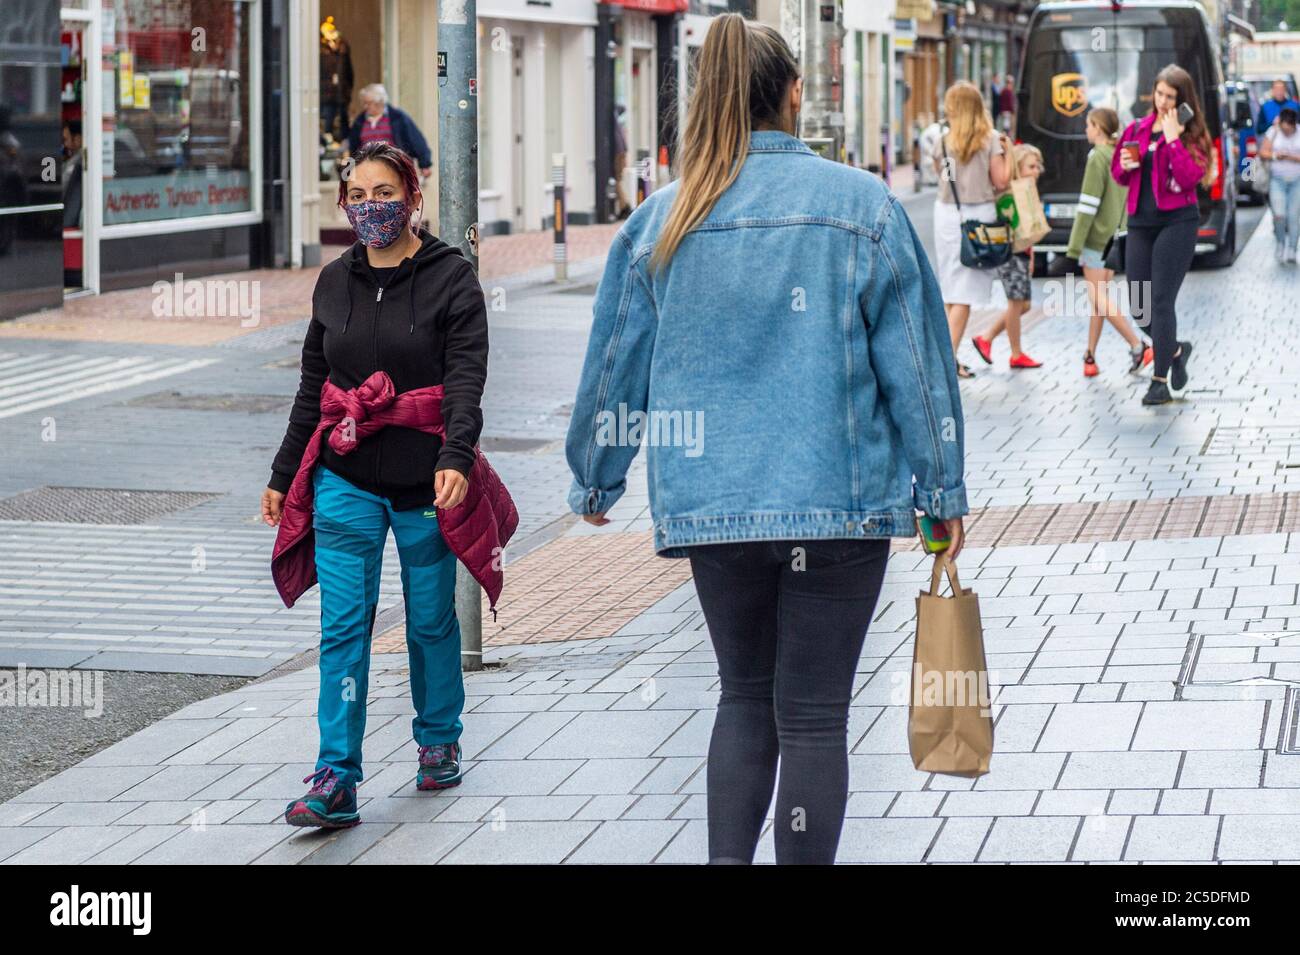 Cork, Ireland. 2nd July, 2020. A woman wears a face mask in Cork city to protect herself against Covid-19. Credit: AG News/Alamy Live News Stock Photo